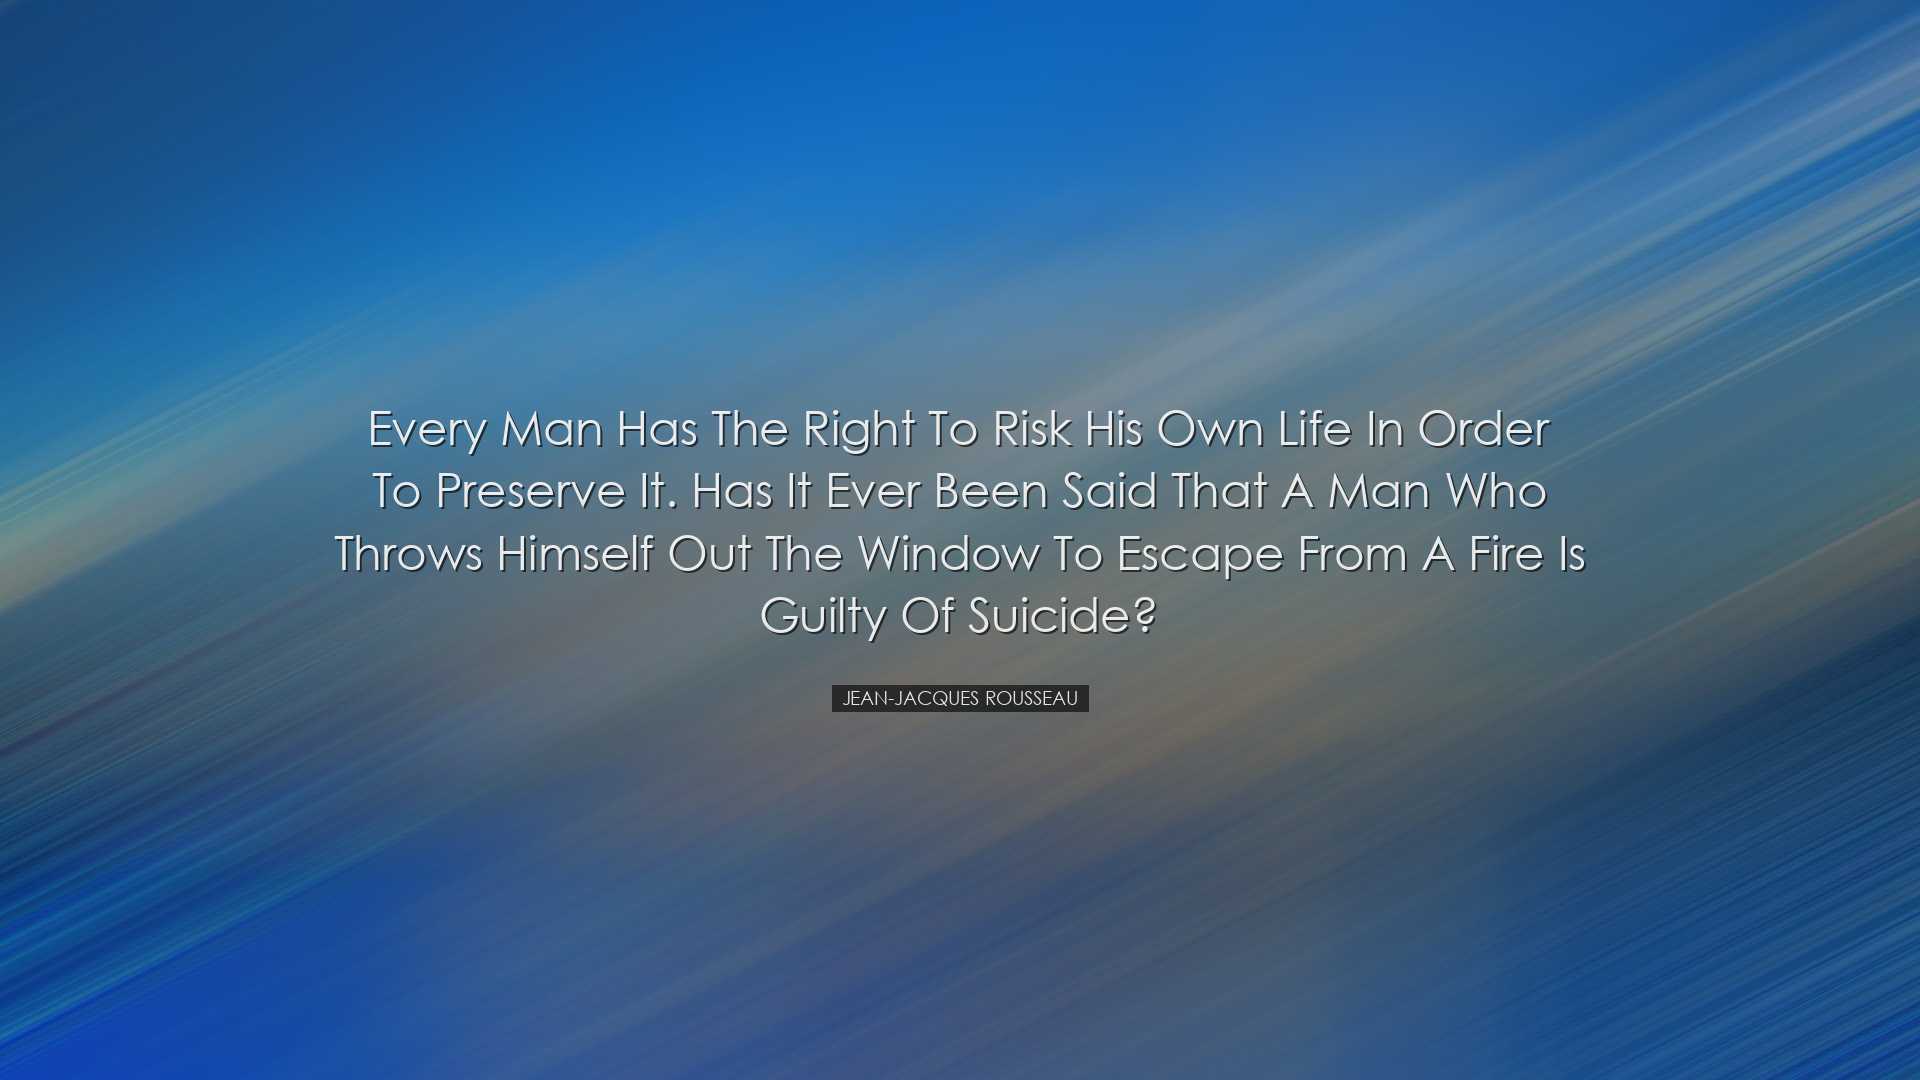 Every man has the right to risk his own life in order to preserve